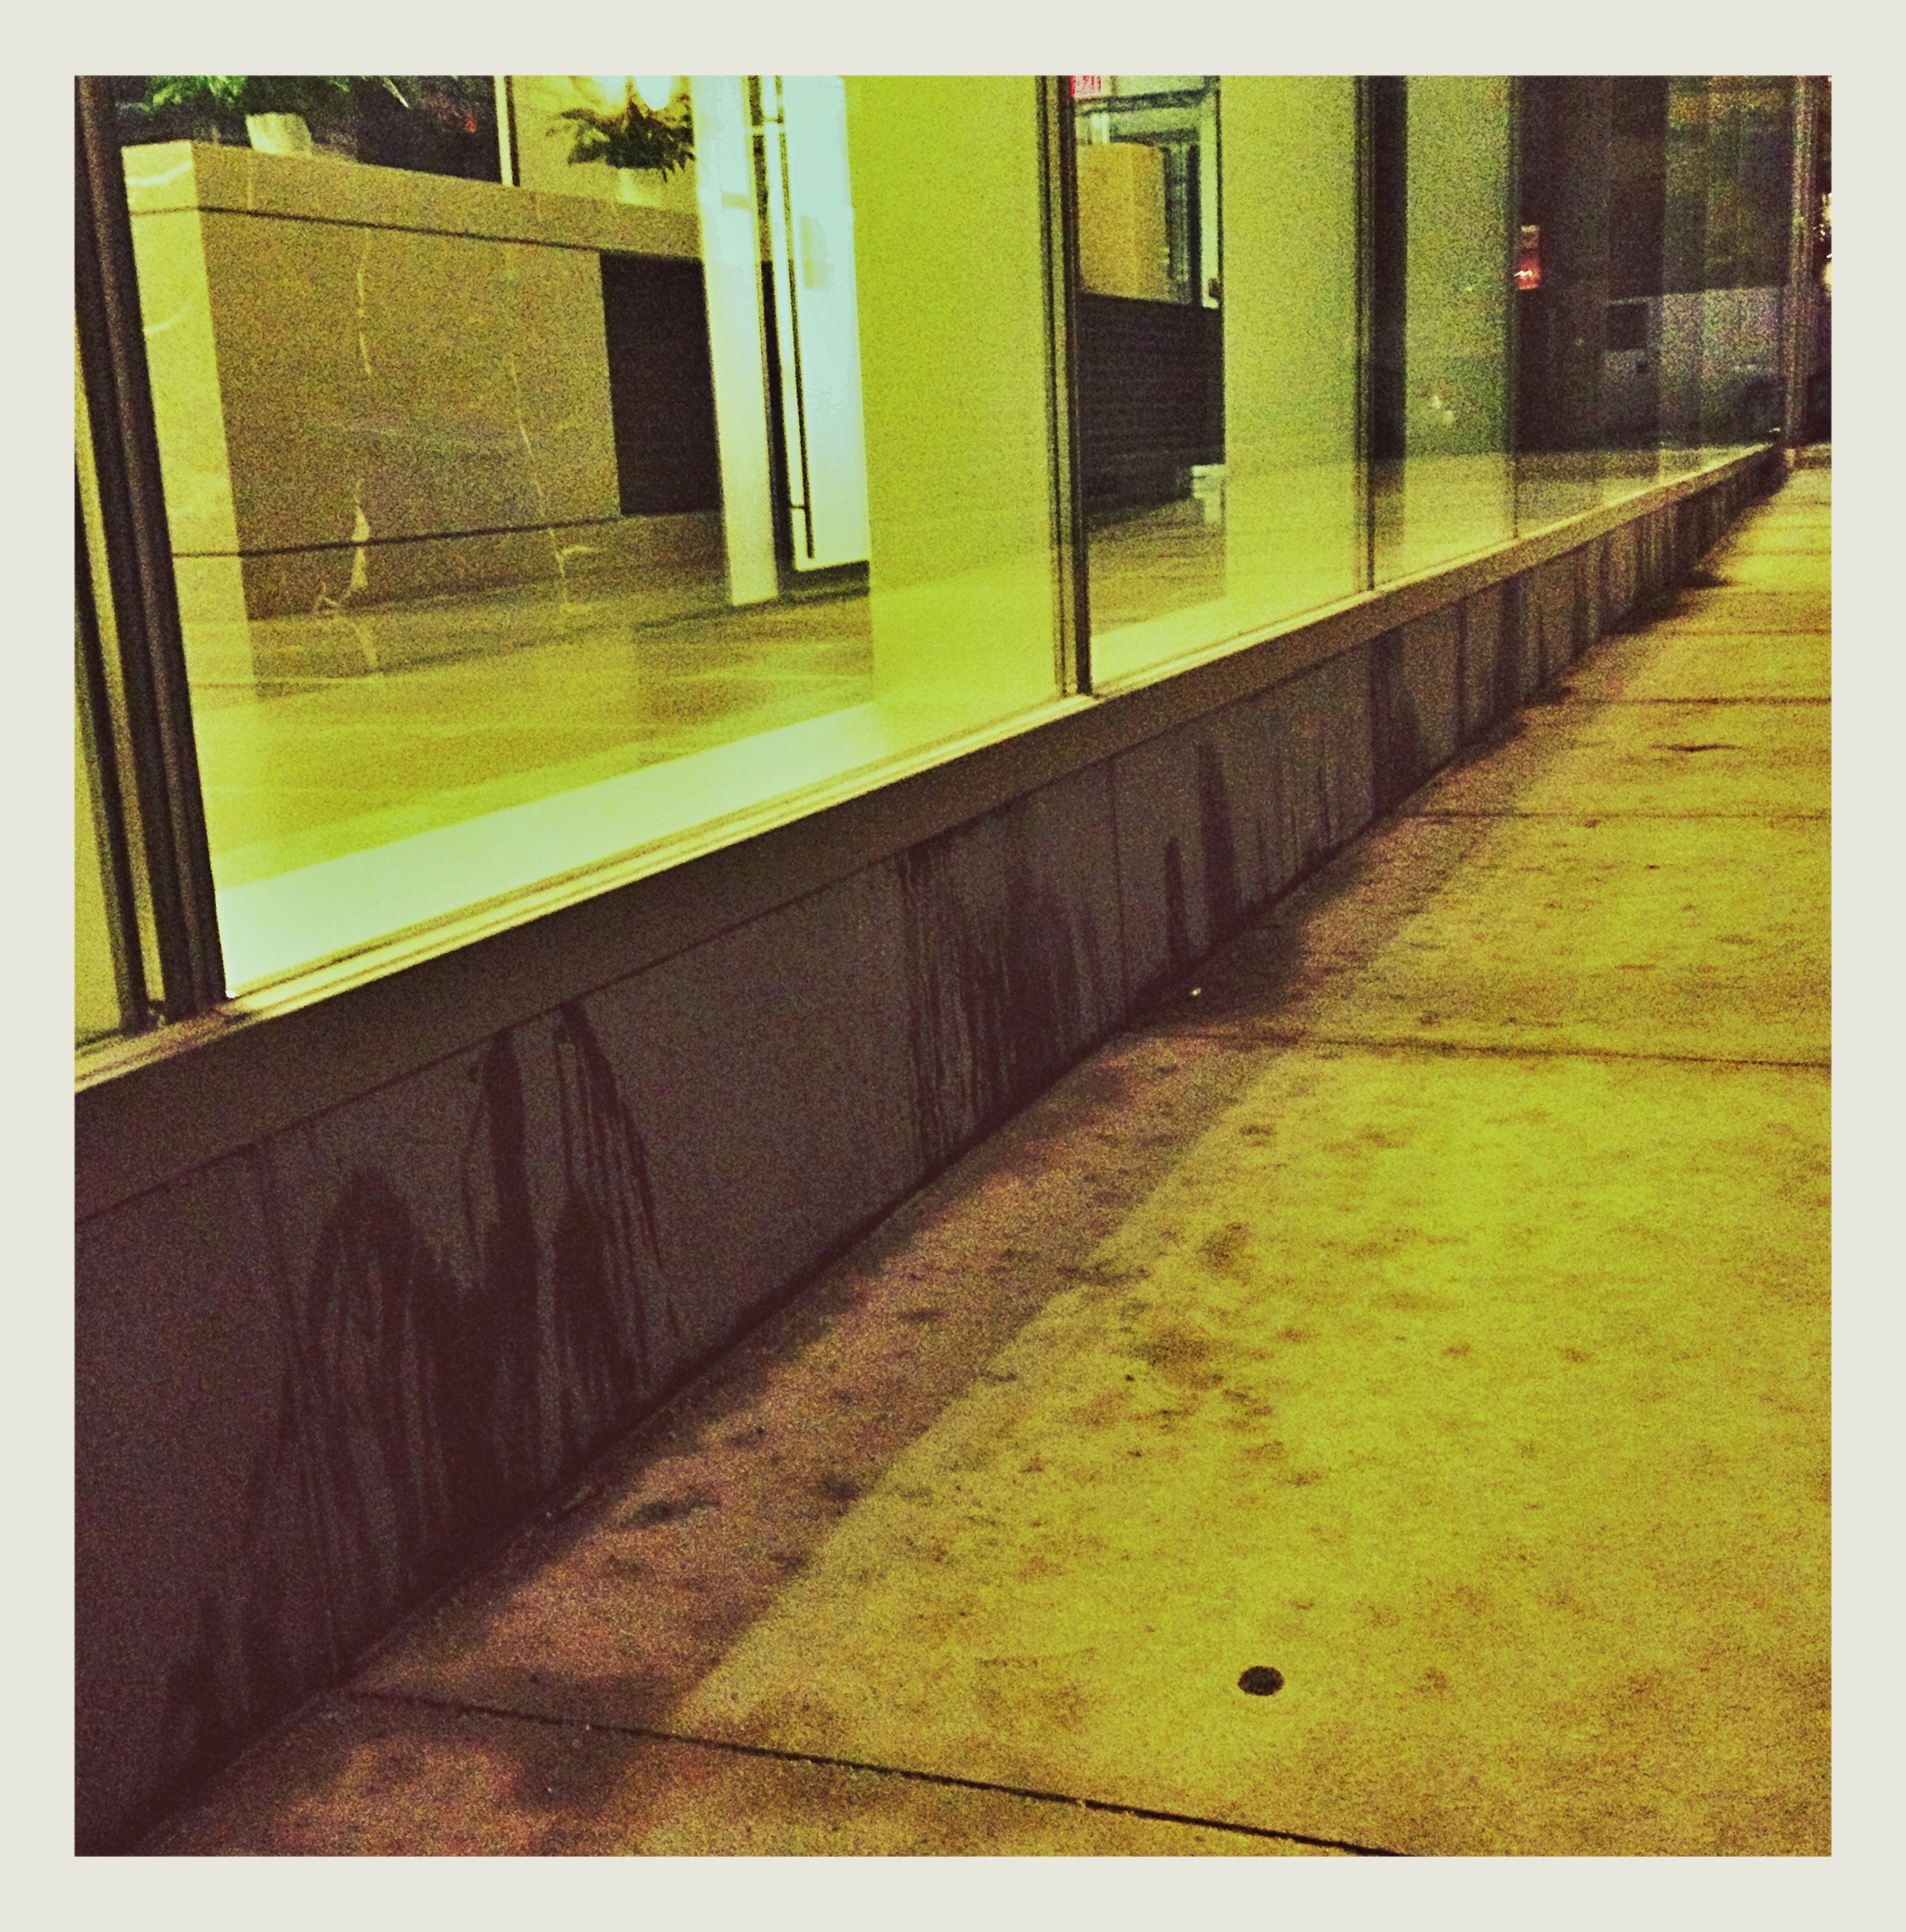 "Piss-Pot" - Desperate dogs or lazy owners leave a urine stained walkway @ThompsonToronto Hotel & Suites, Toronto